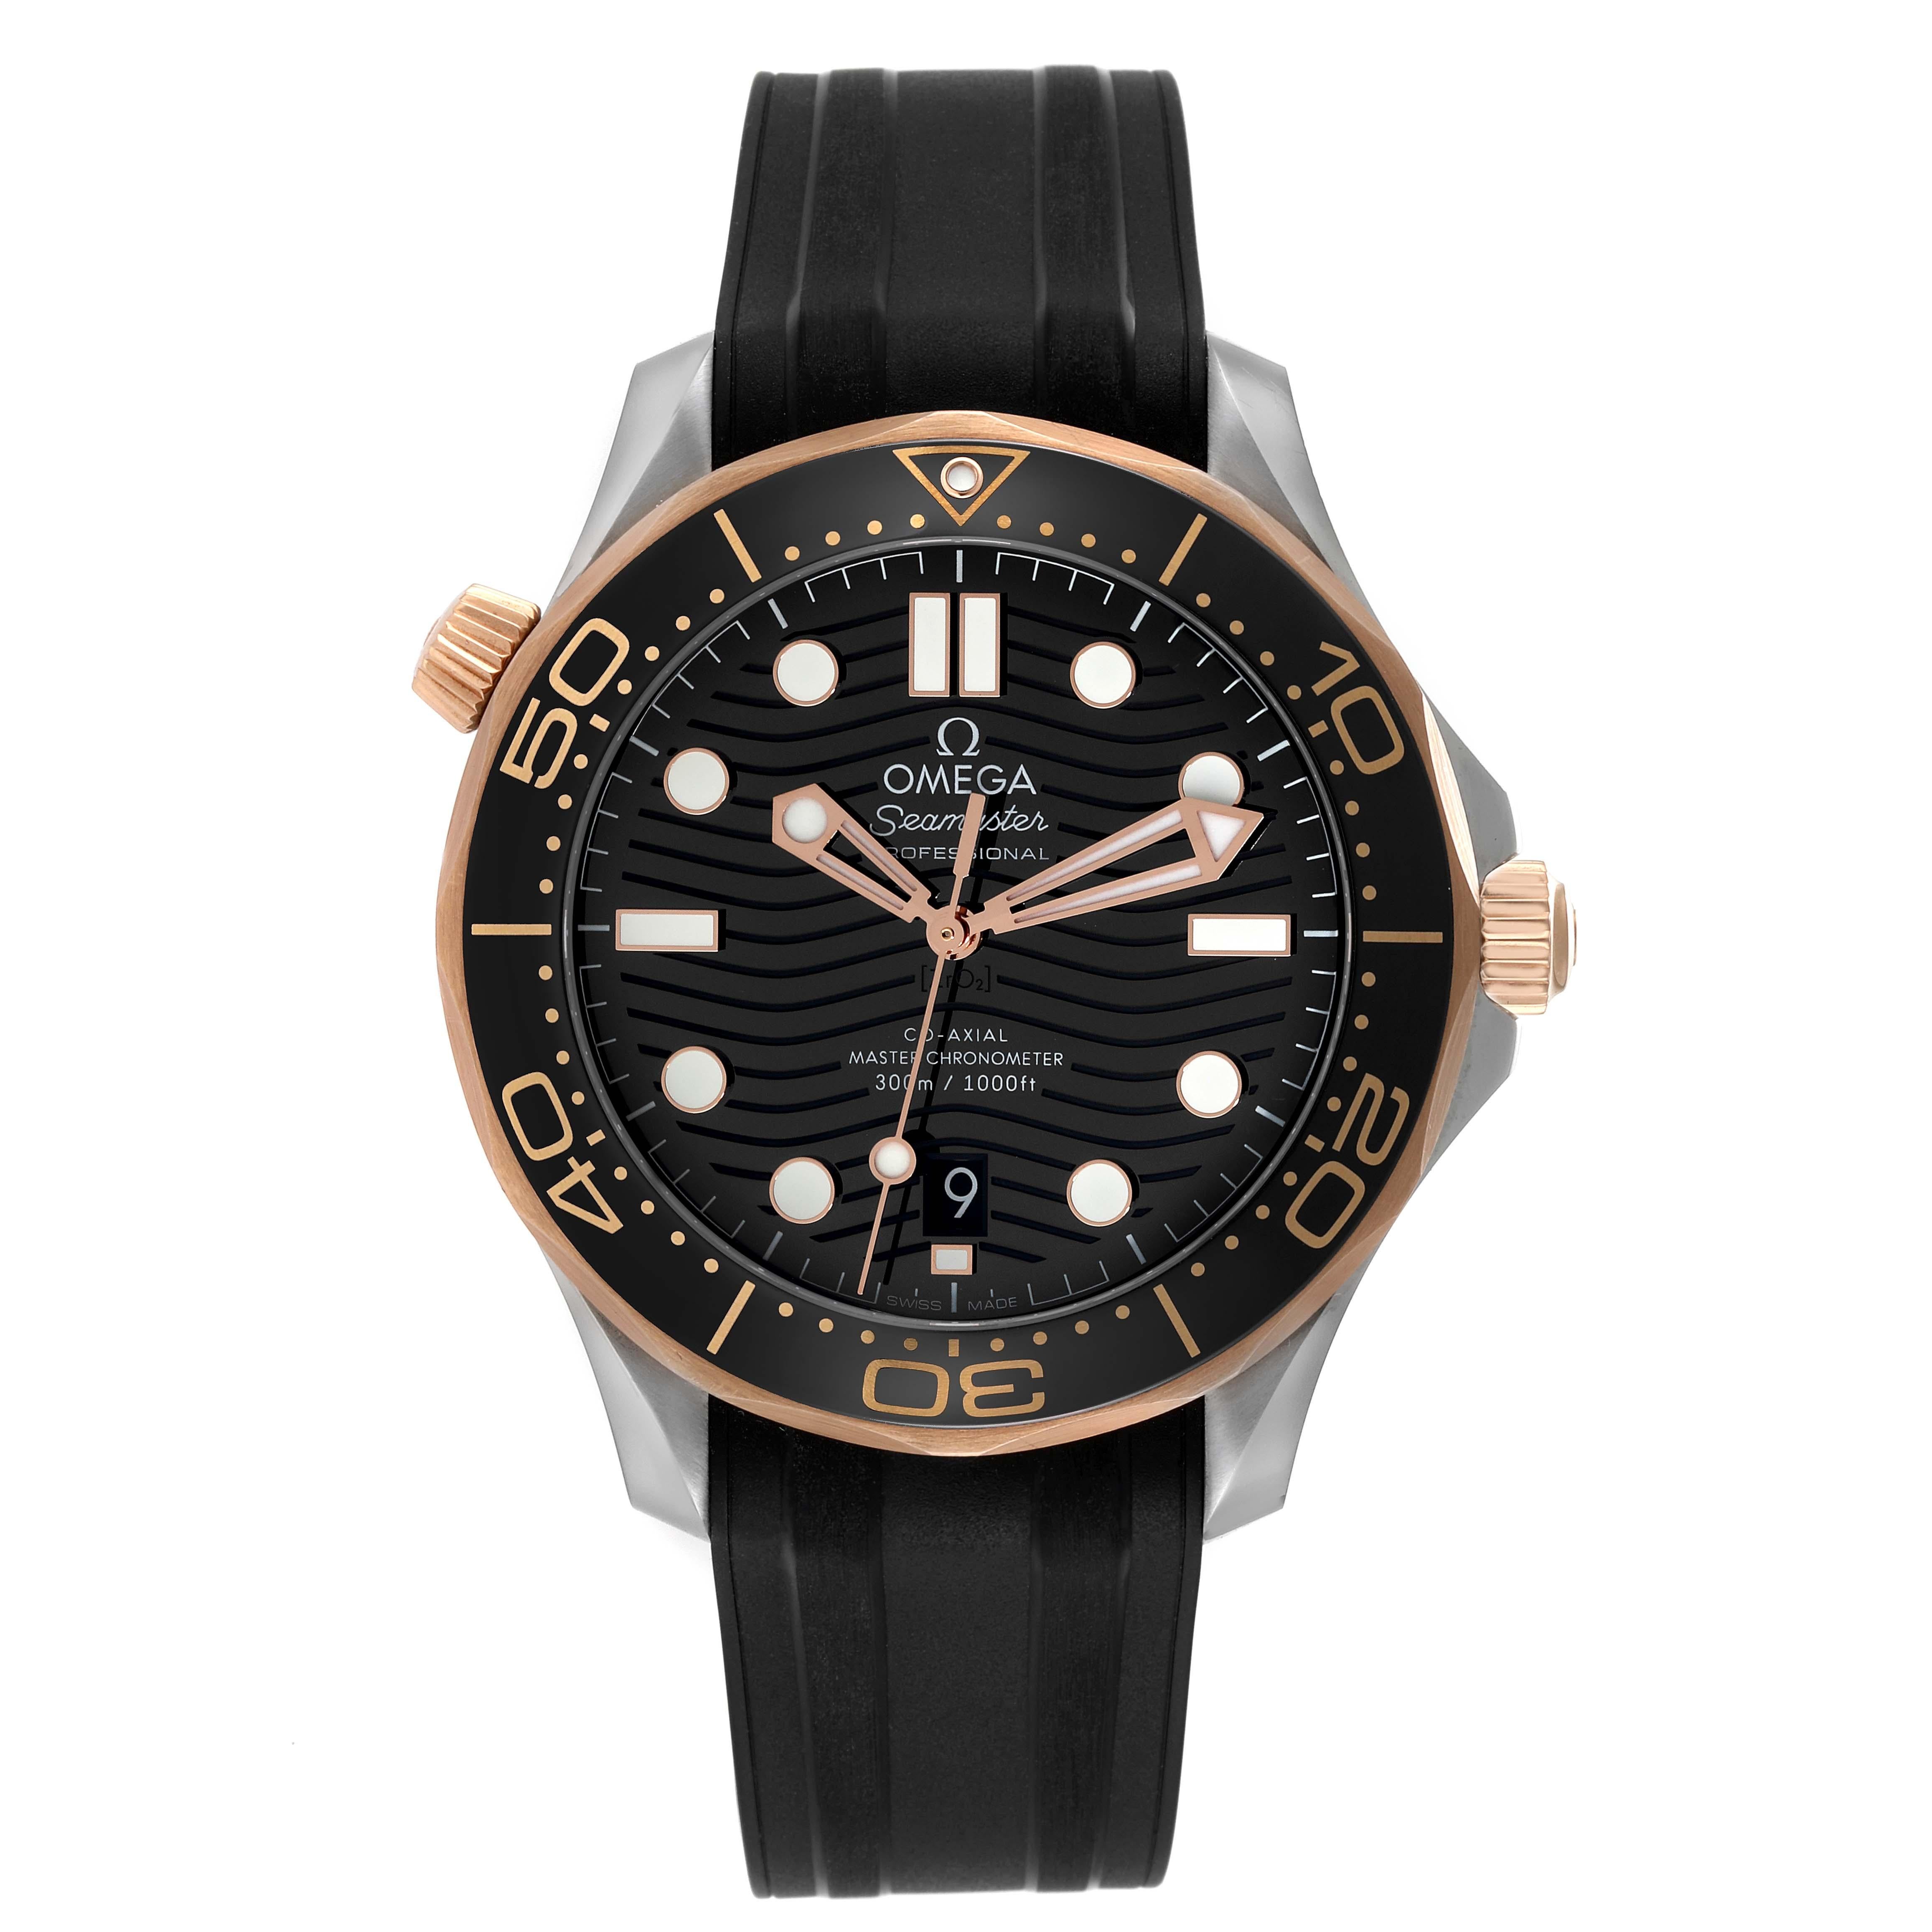 Omega Seamaster Diver Steel Rose Gold Mens Watch 210.22.42.20.01.002 Box Card. Automatic self-winding chronometer, Co-Axial Escapement movement. Certified Master Chronometer, approved by METAS, resistant to magnetic fields reaching 15,000 gauss.